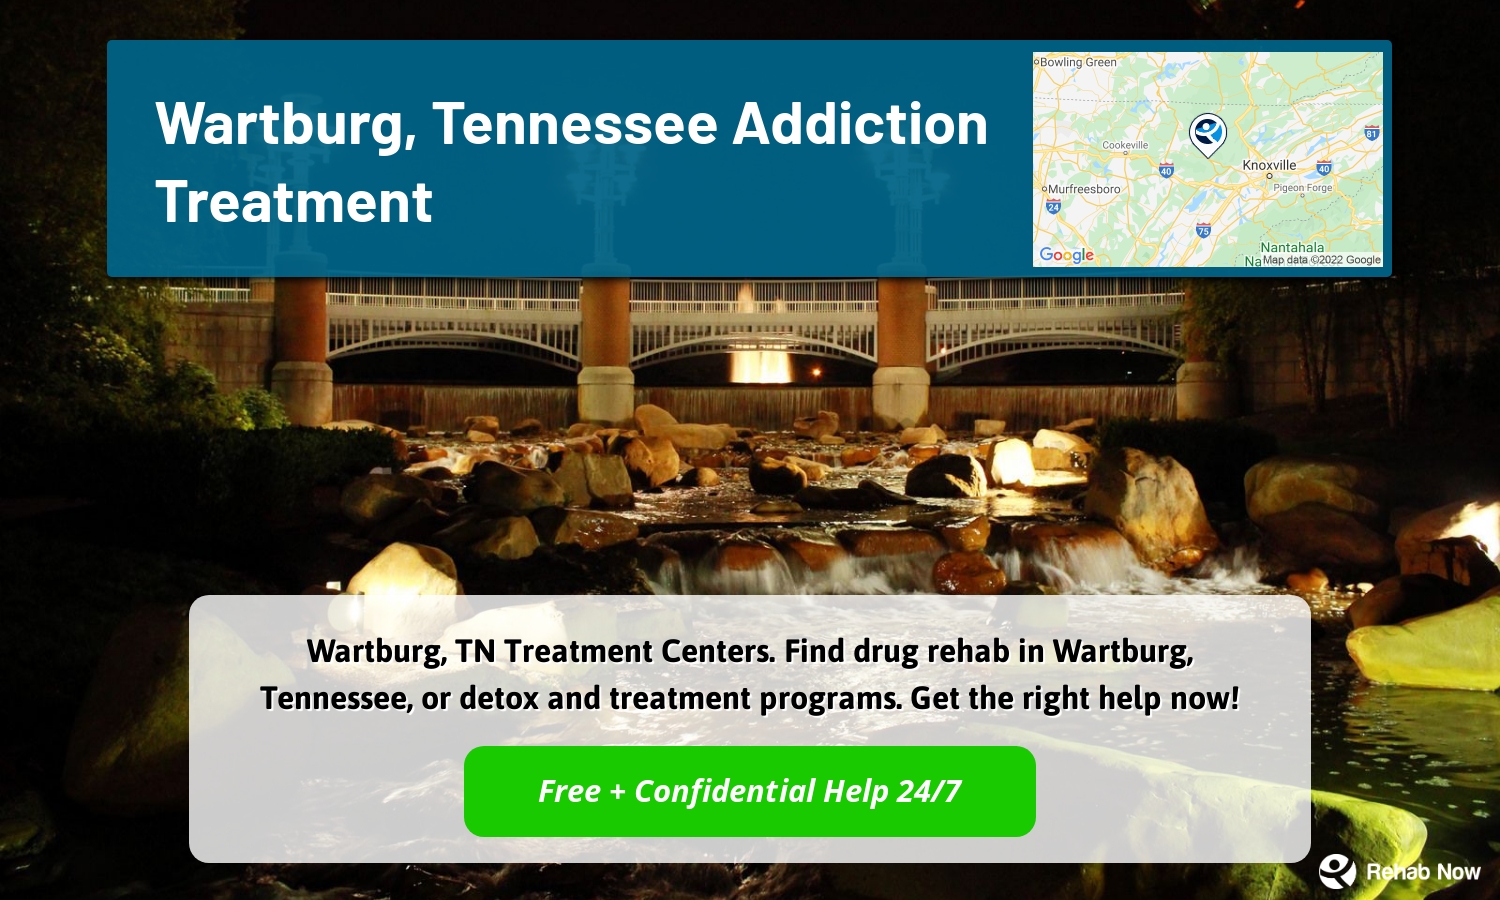 Wartburg, TN Treatment Centers. Find drug rehab in Wartburg, Tennessee, or detox and treatment programs. Get the right help now!